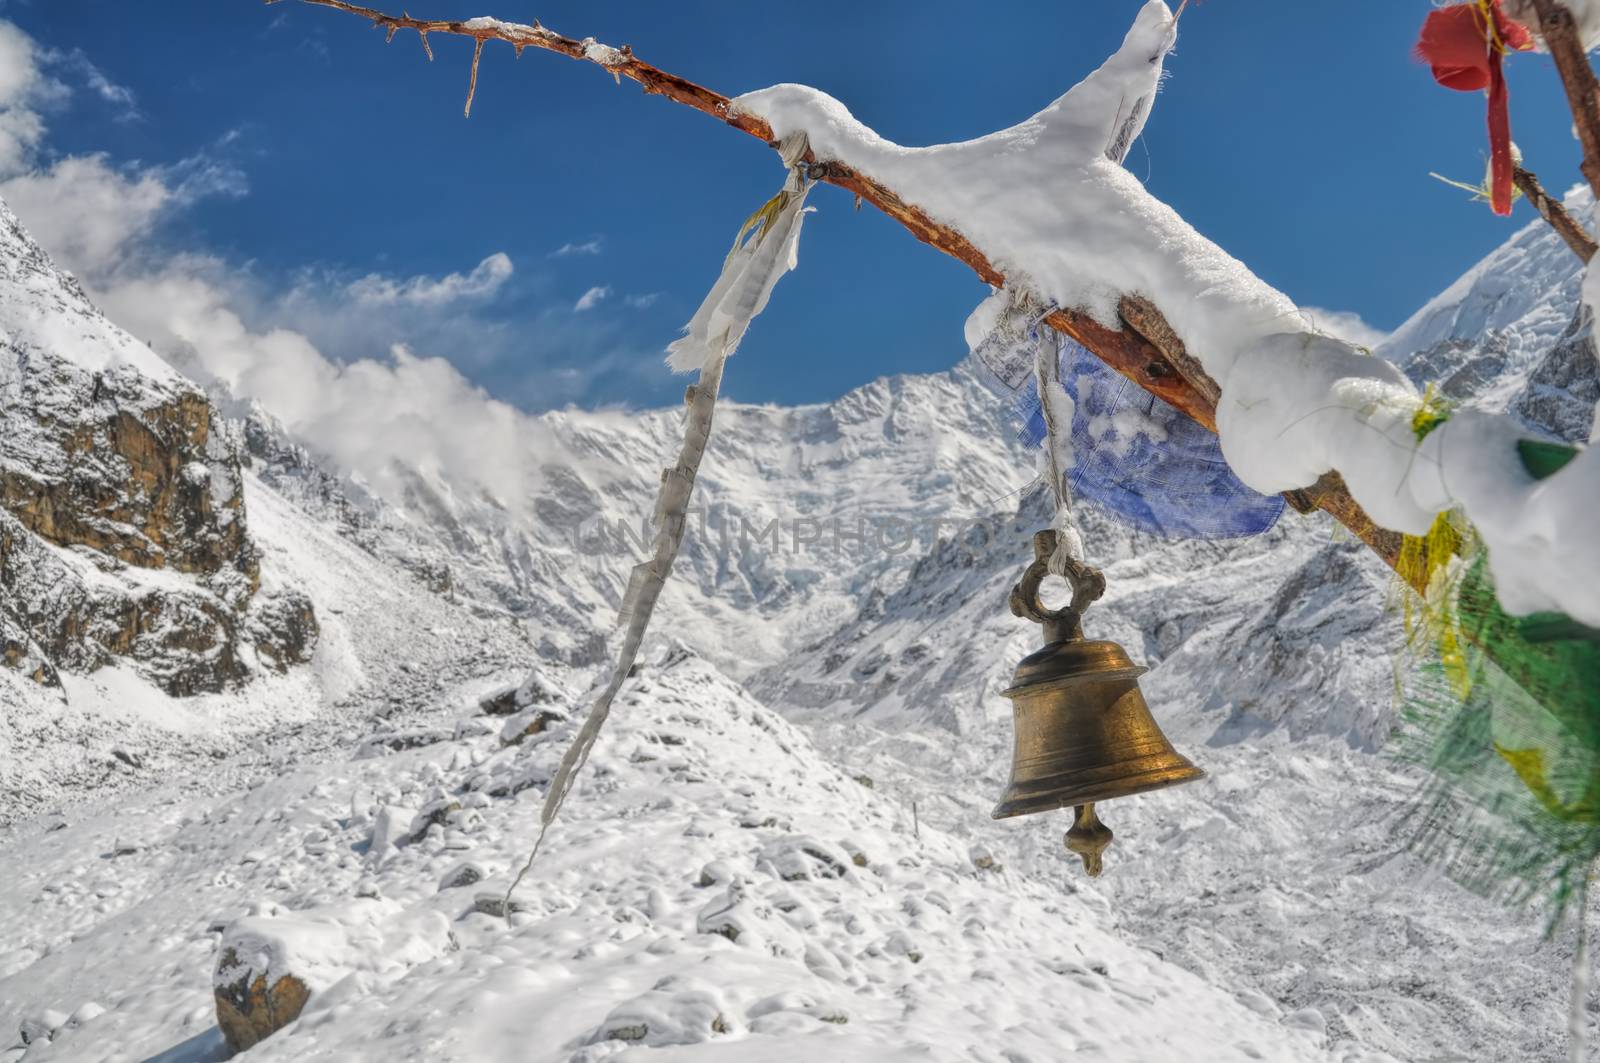 Buddhist bell and prayer flags in Himalayas near Kanchenjunga, the third tallest mountain in the world